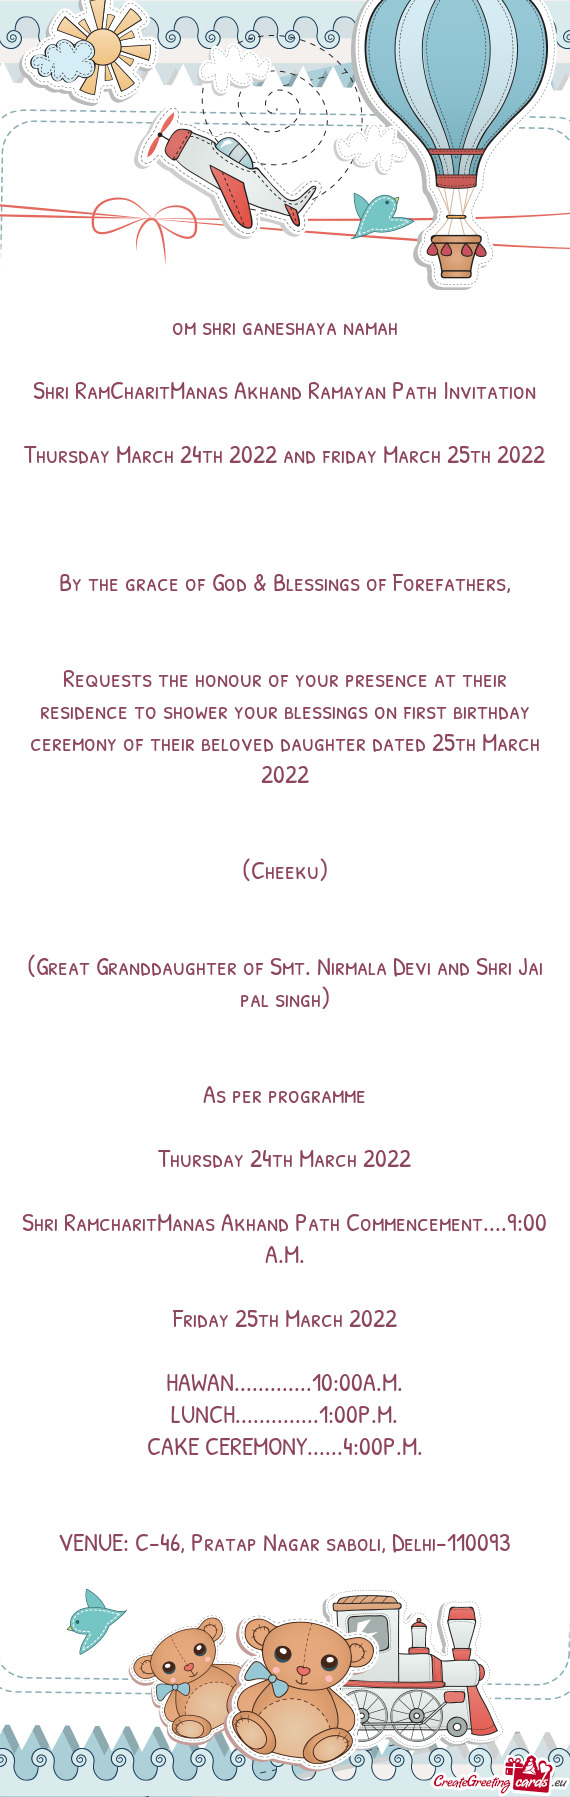 Requests the honour of your presence at their residence to shower your blessings on first birthday c